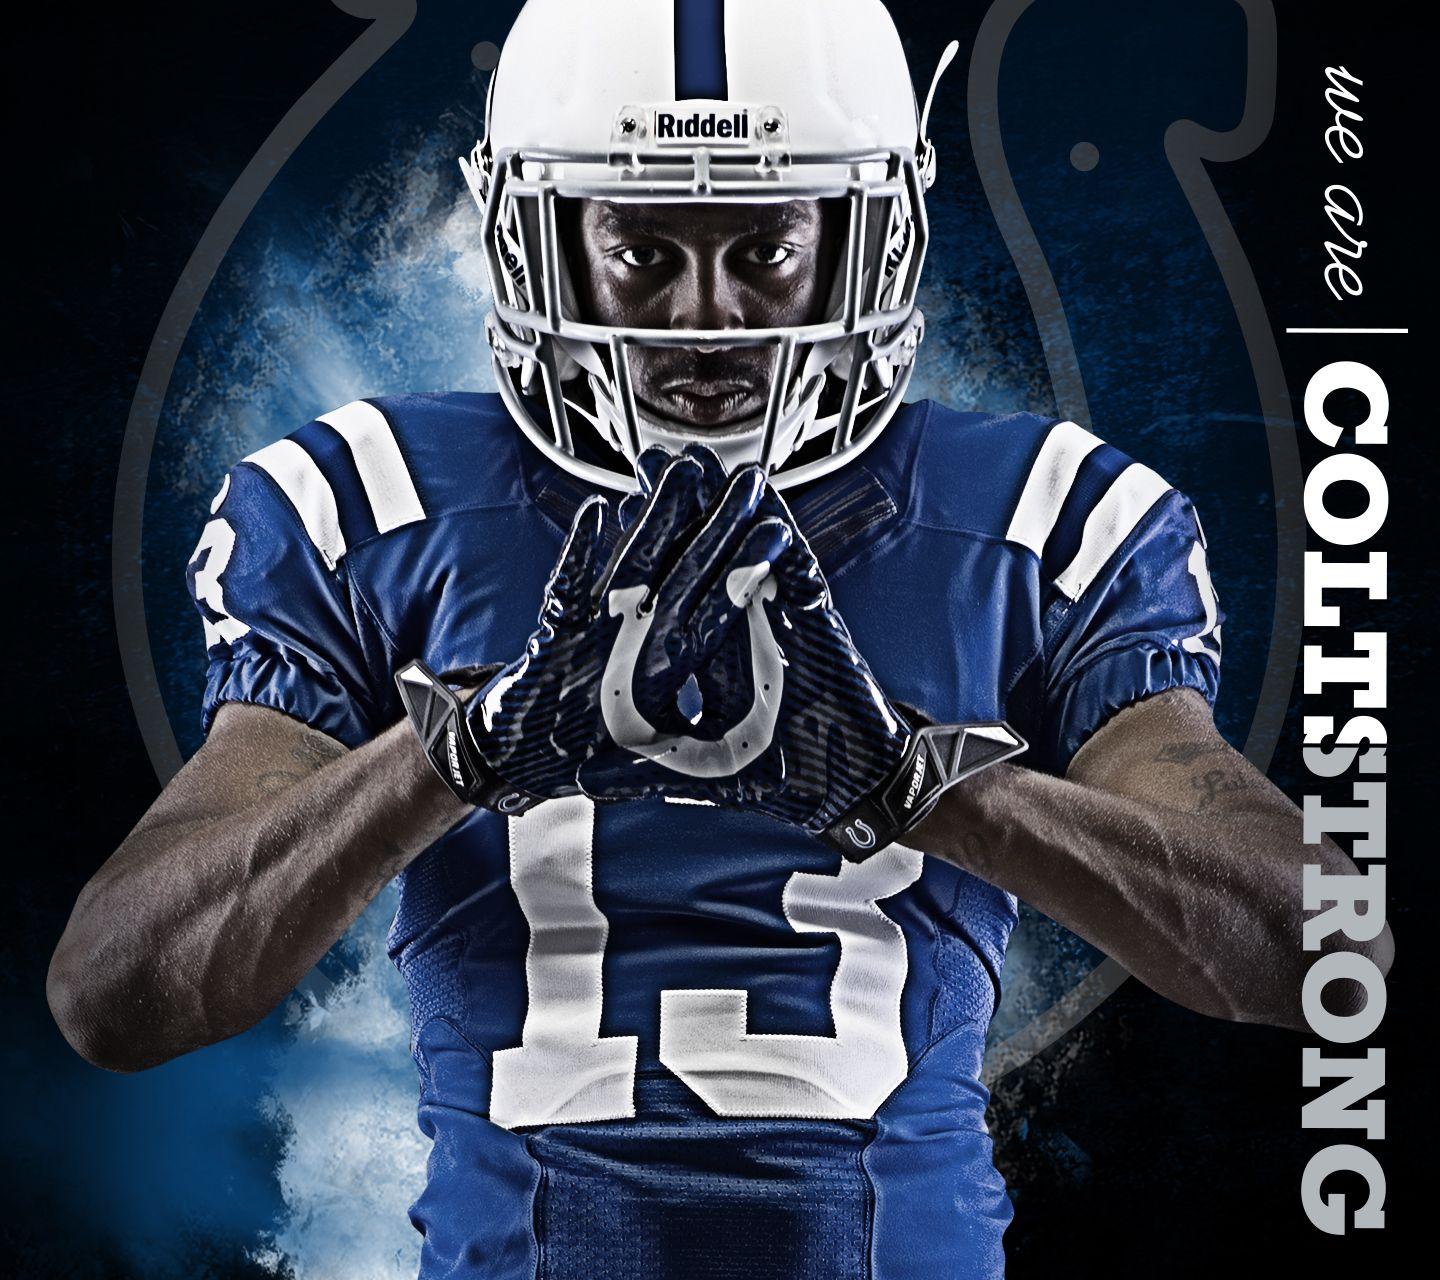 Colts.com. COLTSTRONG Phone Background